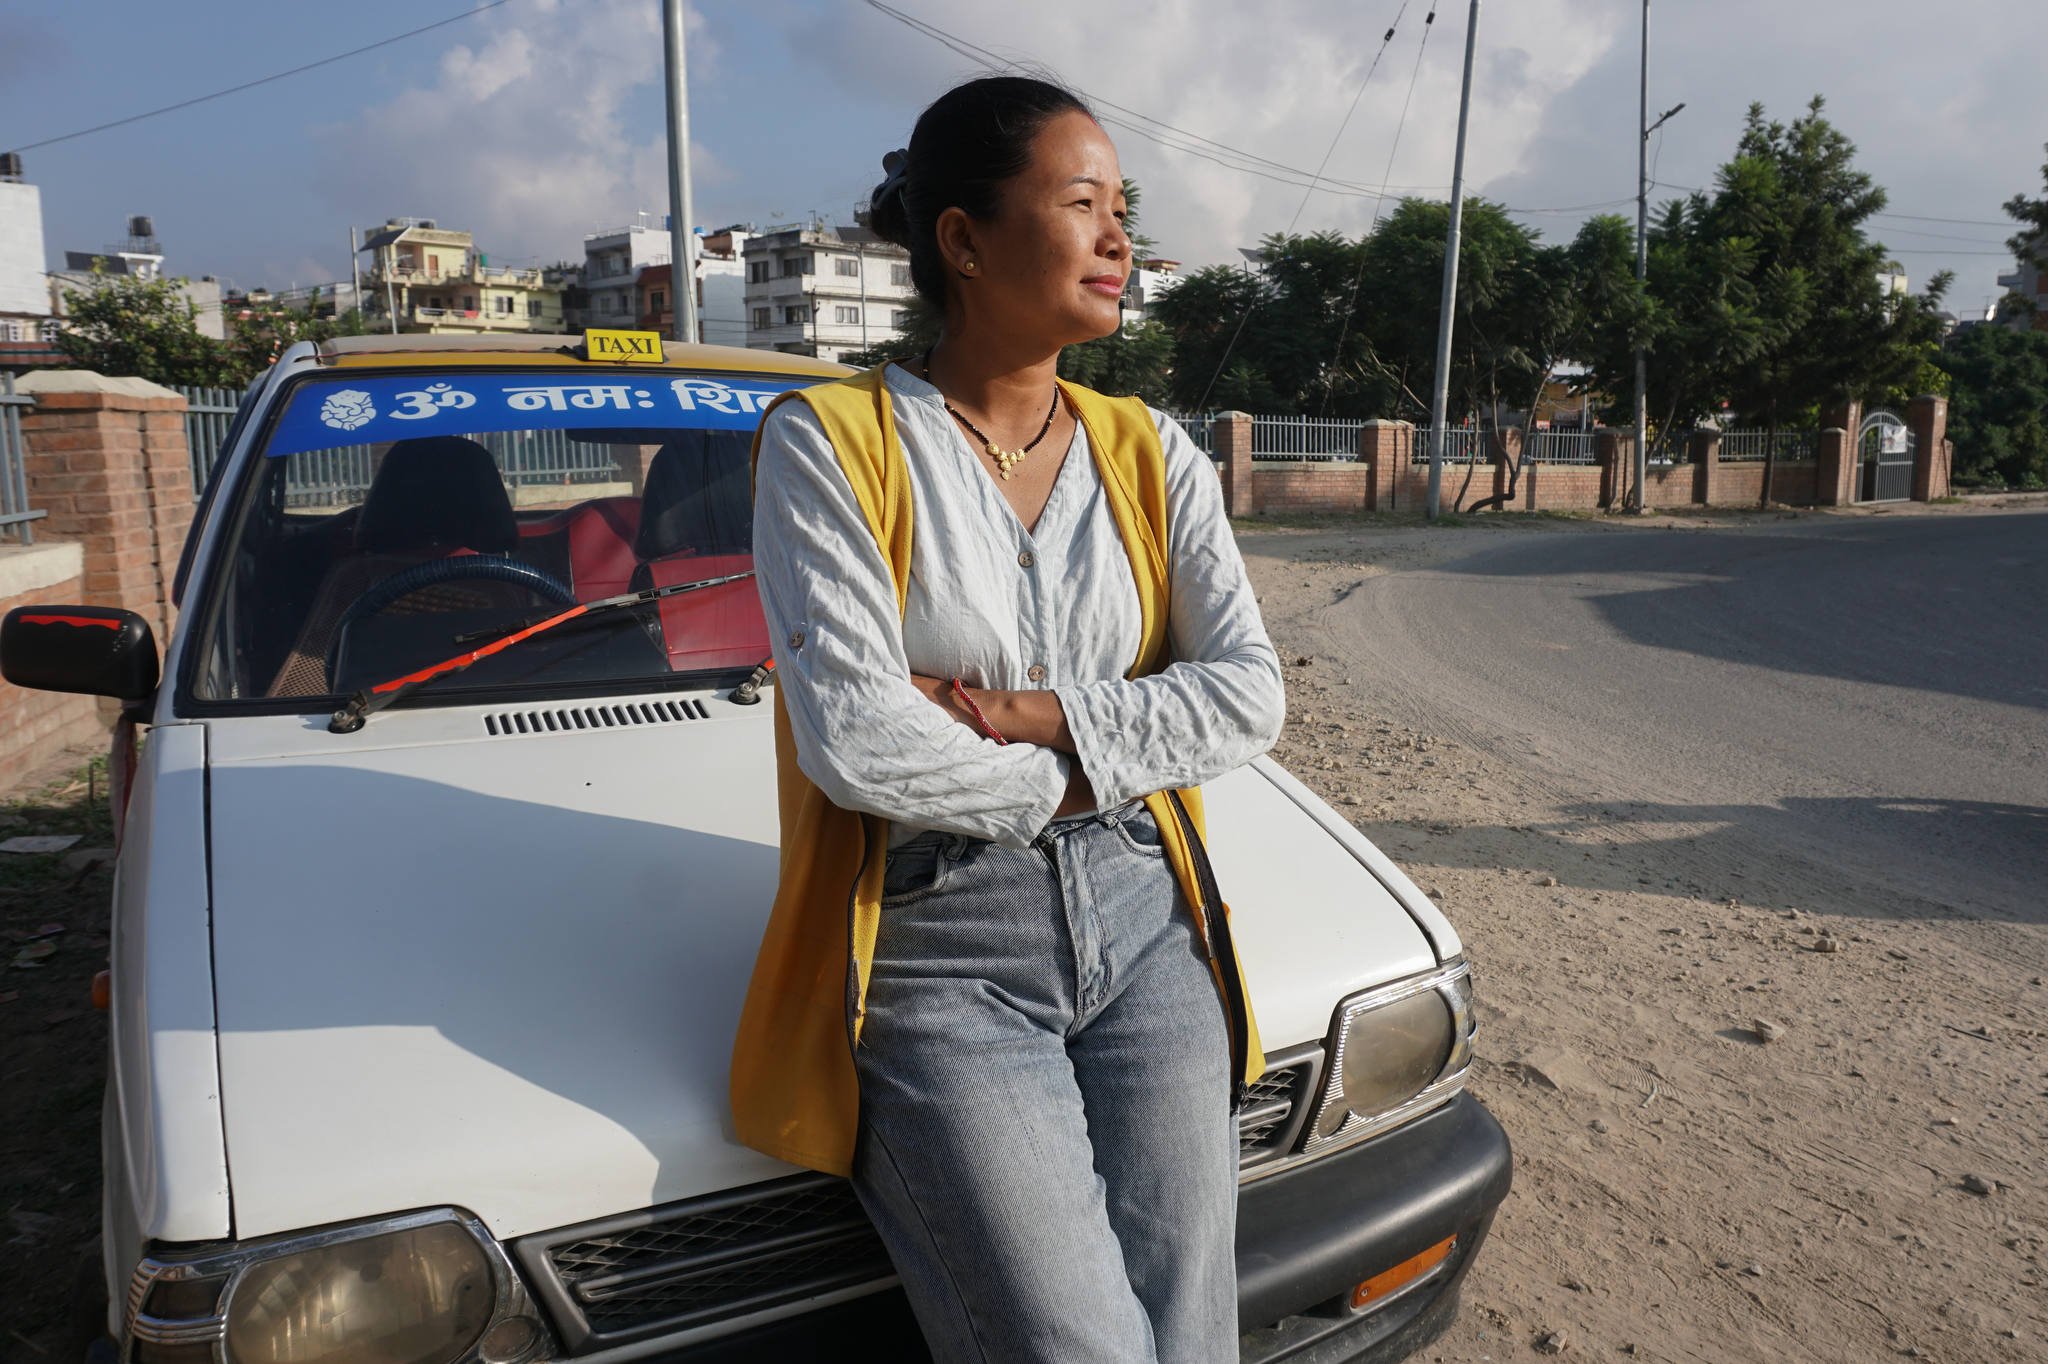 She’s Driving Change as a Taxi Driver on Nepal’s Busiest Streets